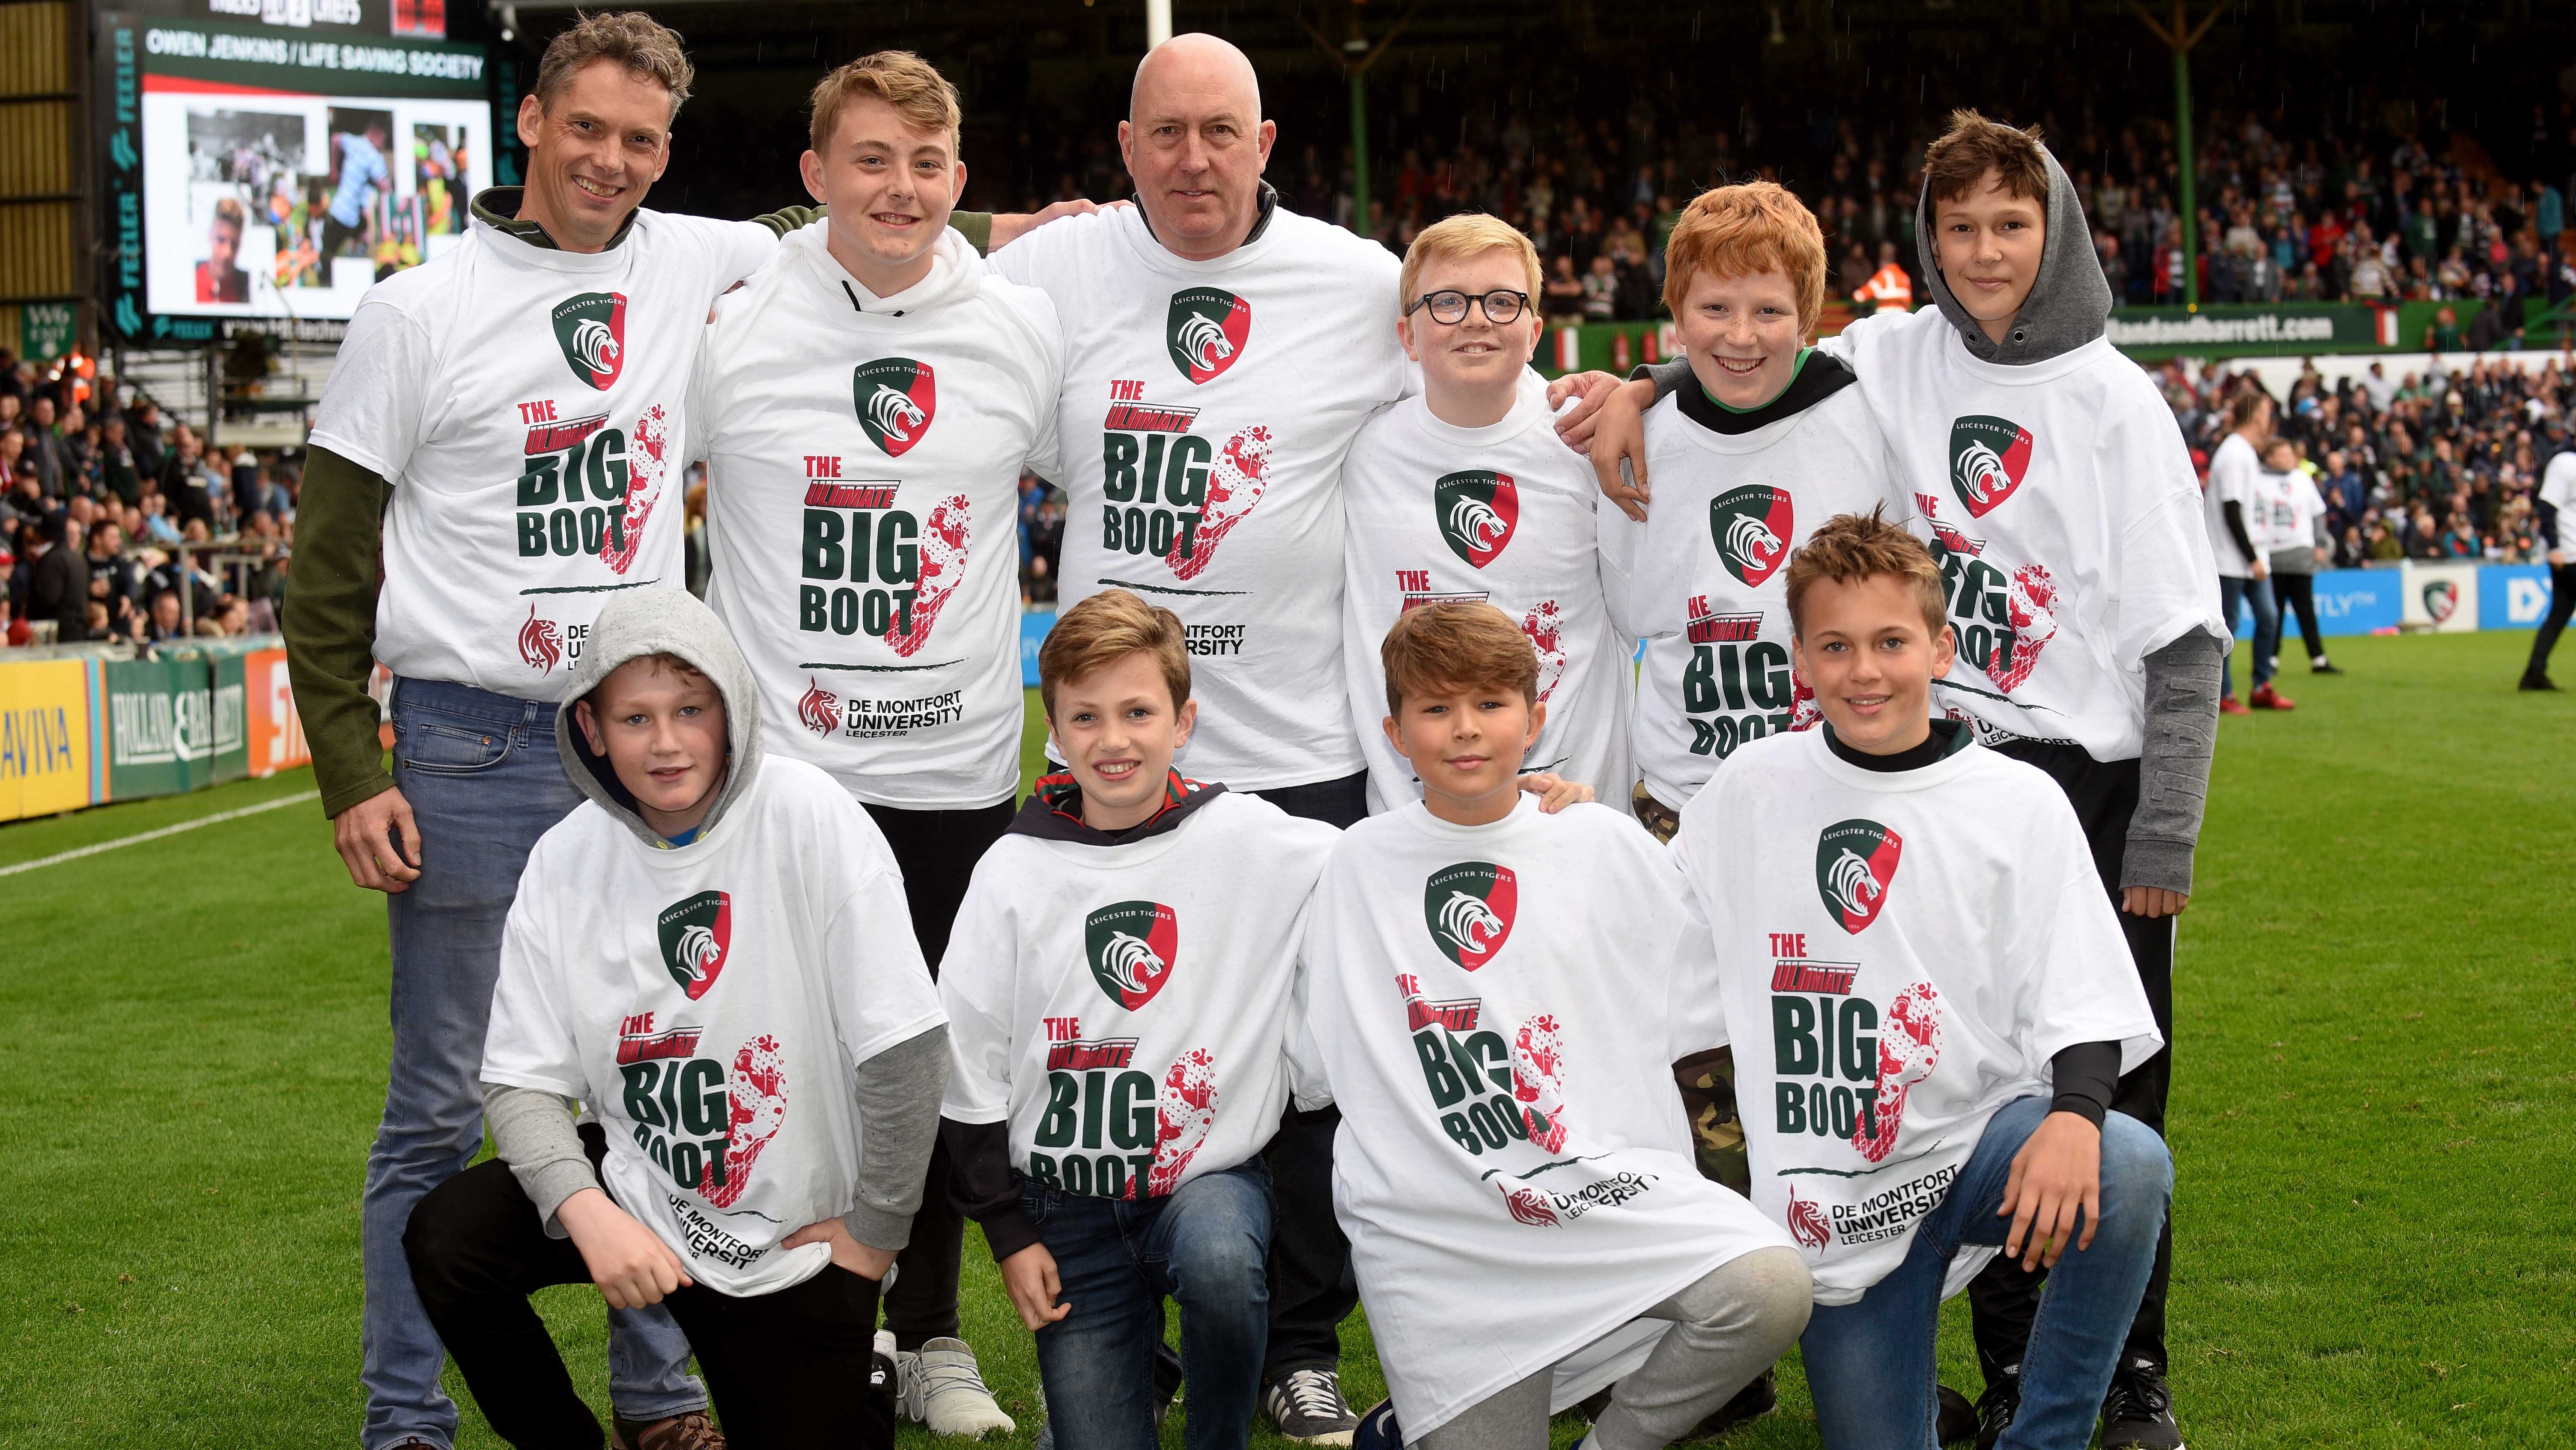 Organise a fun day out with a group of friends and family at Welford Road!